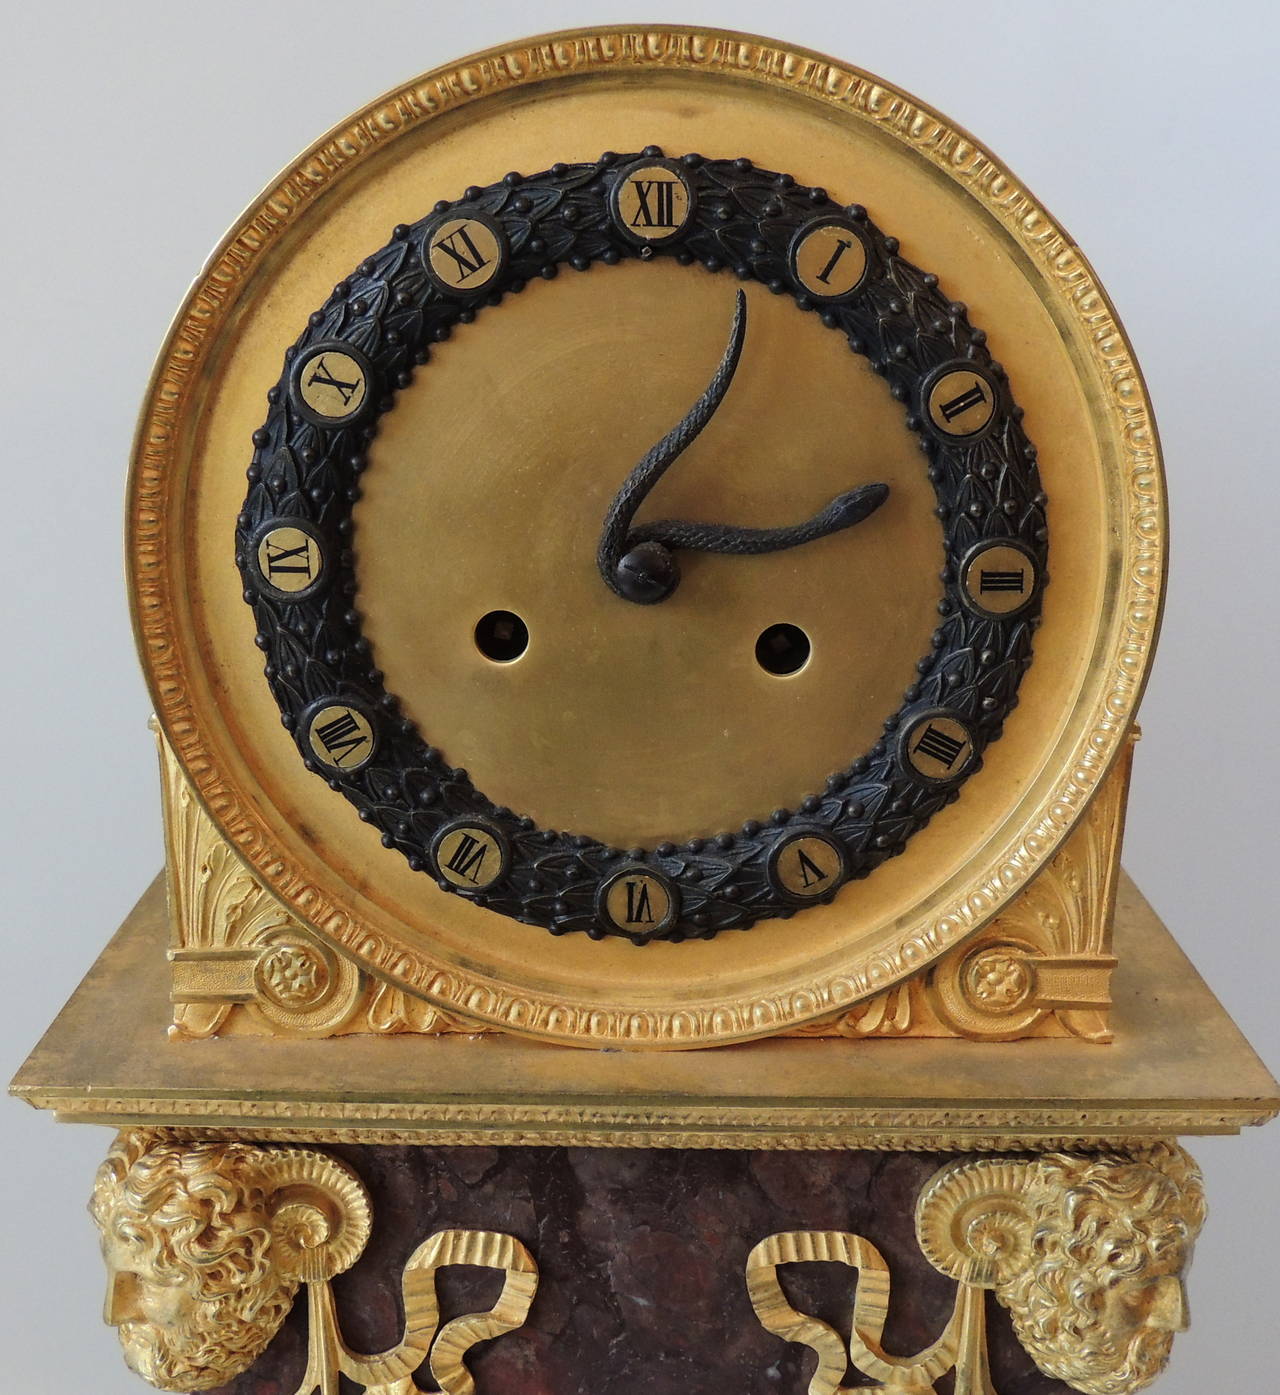 This early 19th century Empire style figural clock with a snake as the hands on the clock is set on wonderful rouge marble and a pedestal base. The four corners are marked with four wonderfully detailed doré bronze figure heads, The front is